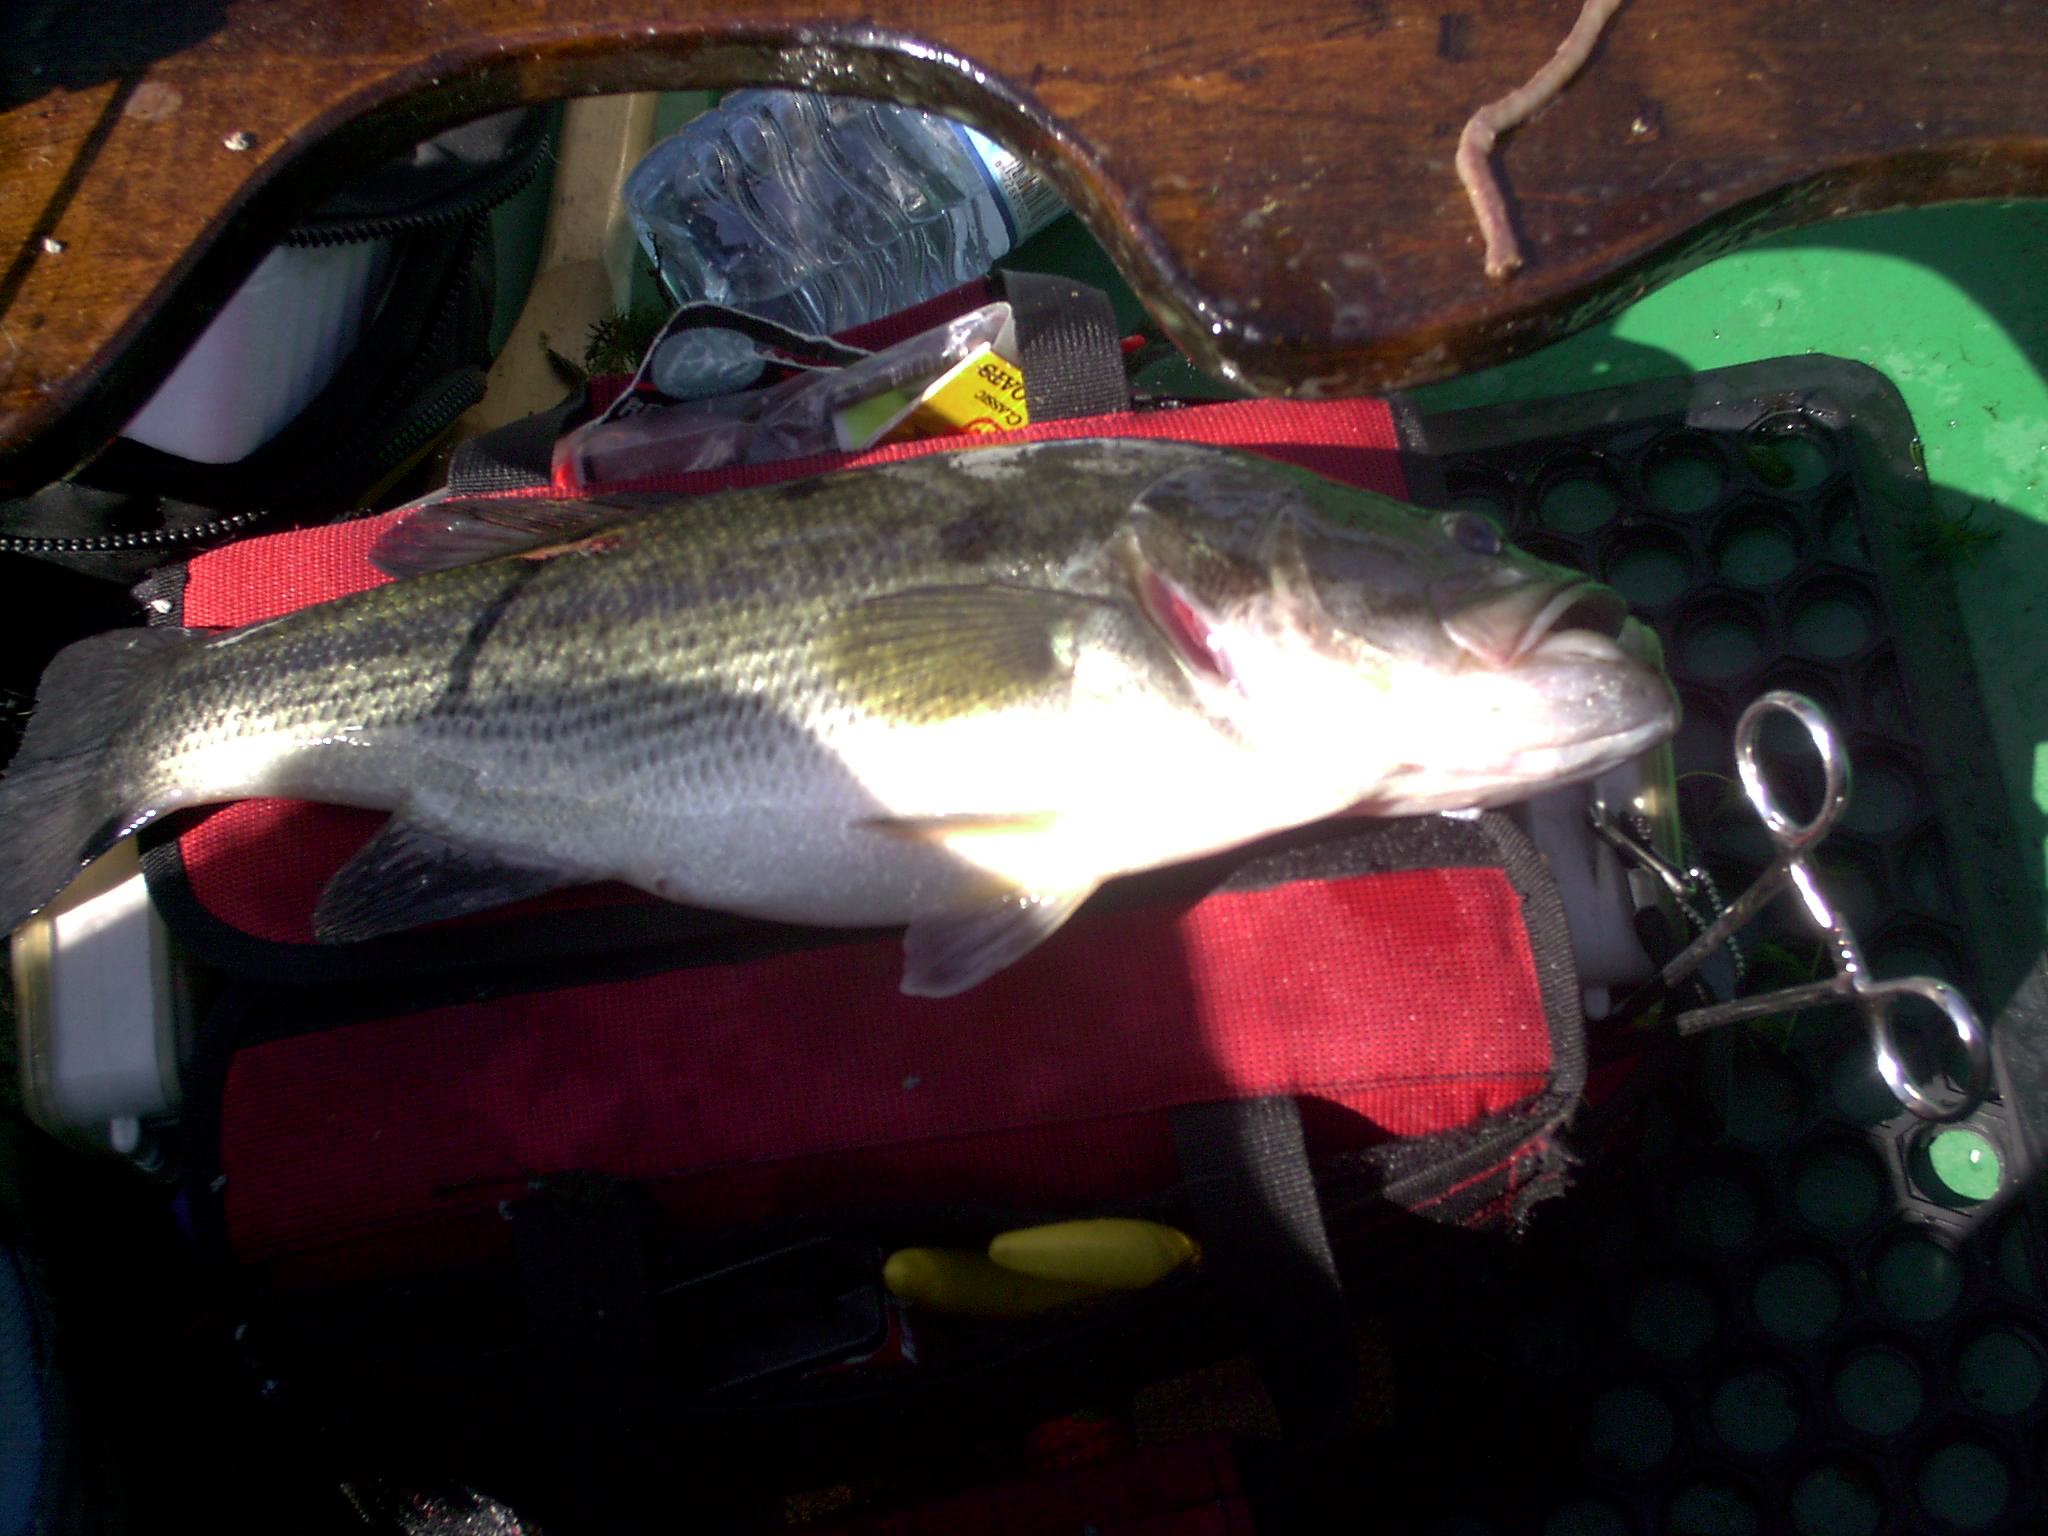 Picture of another nice bass.